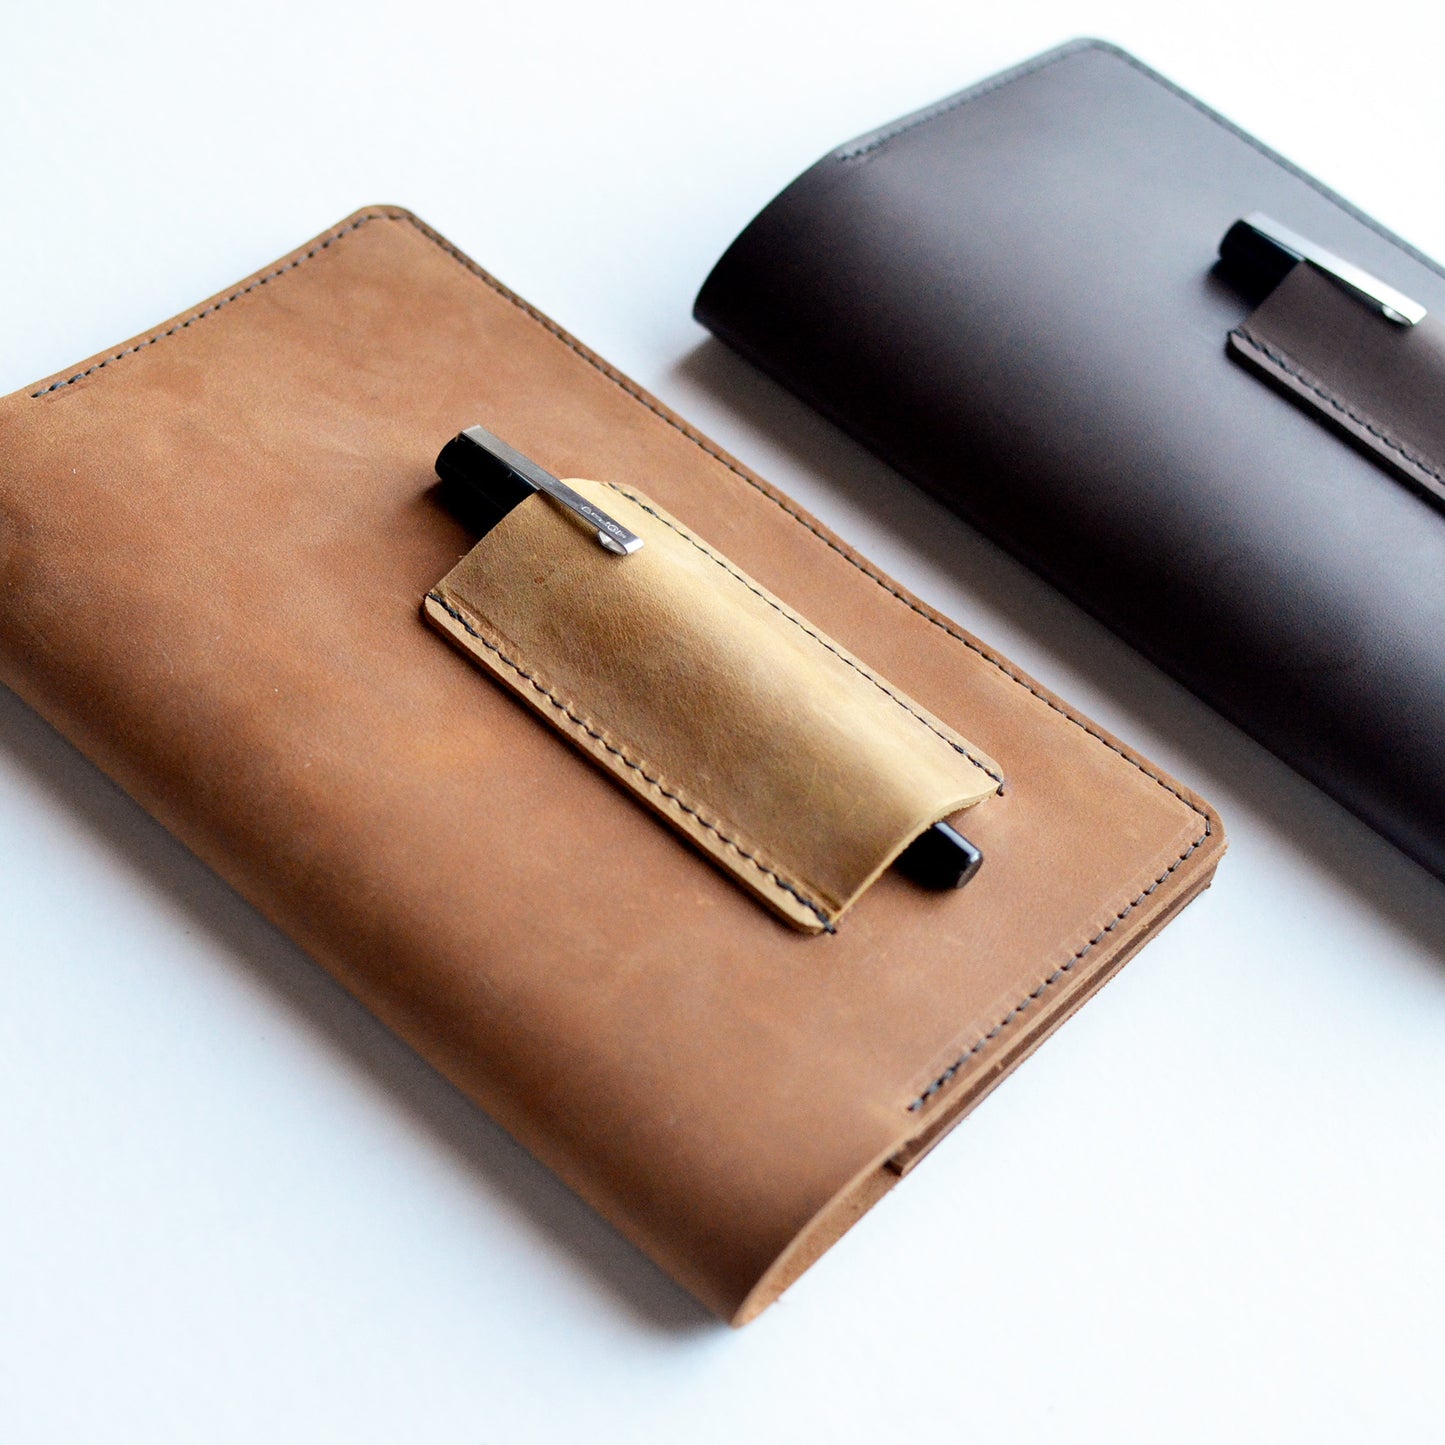 Refillable Leather Journal + Pen - Dark Brown Leather